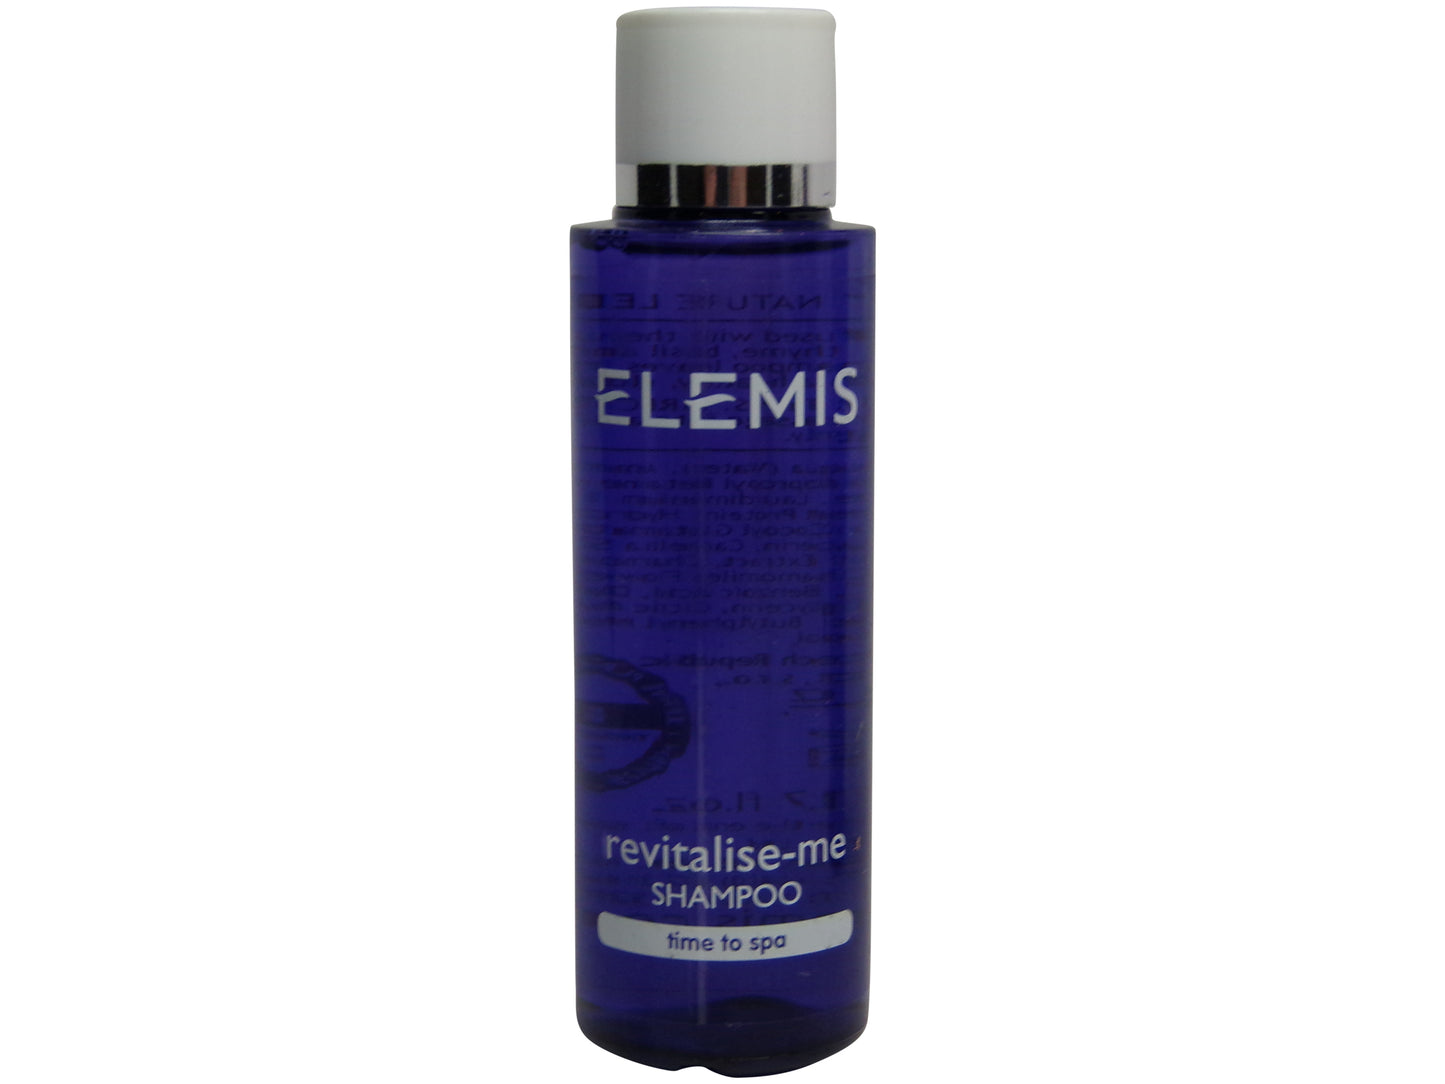 Elemis Revitalise Me Shampoo and Conditioner lot of 6 Bottles (3 of each)